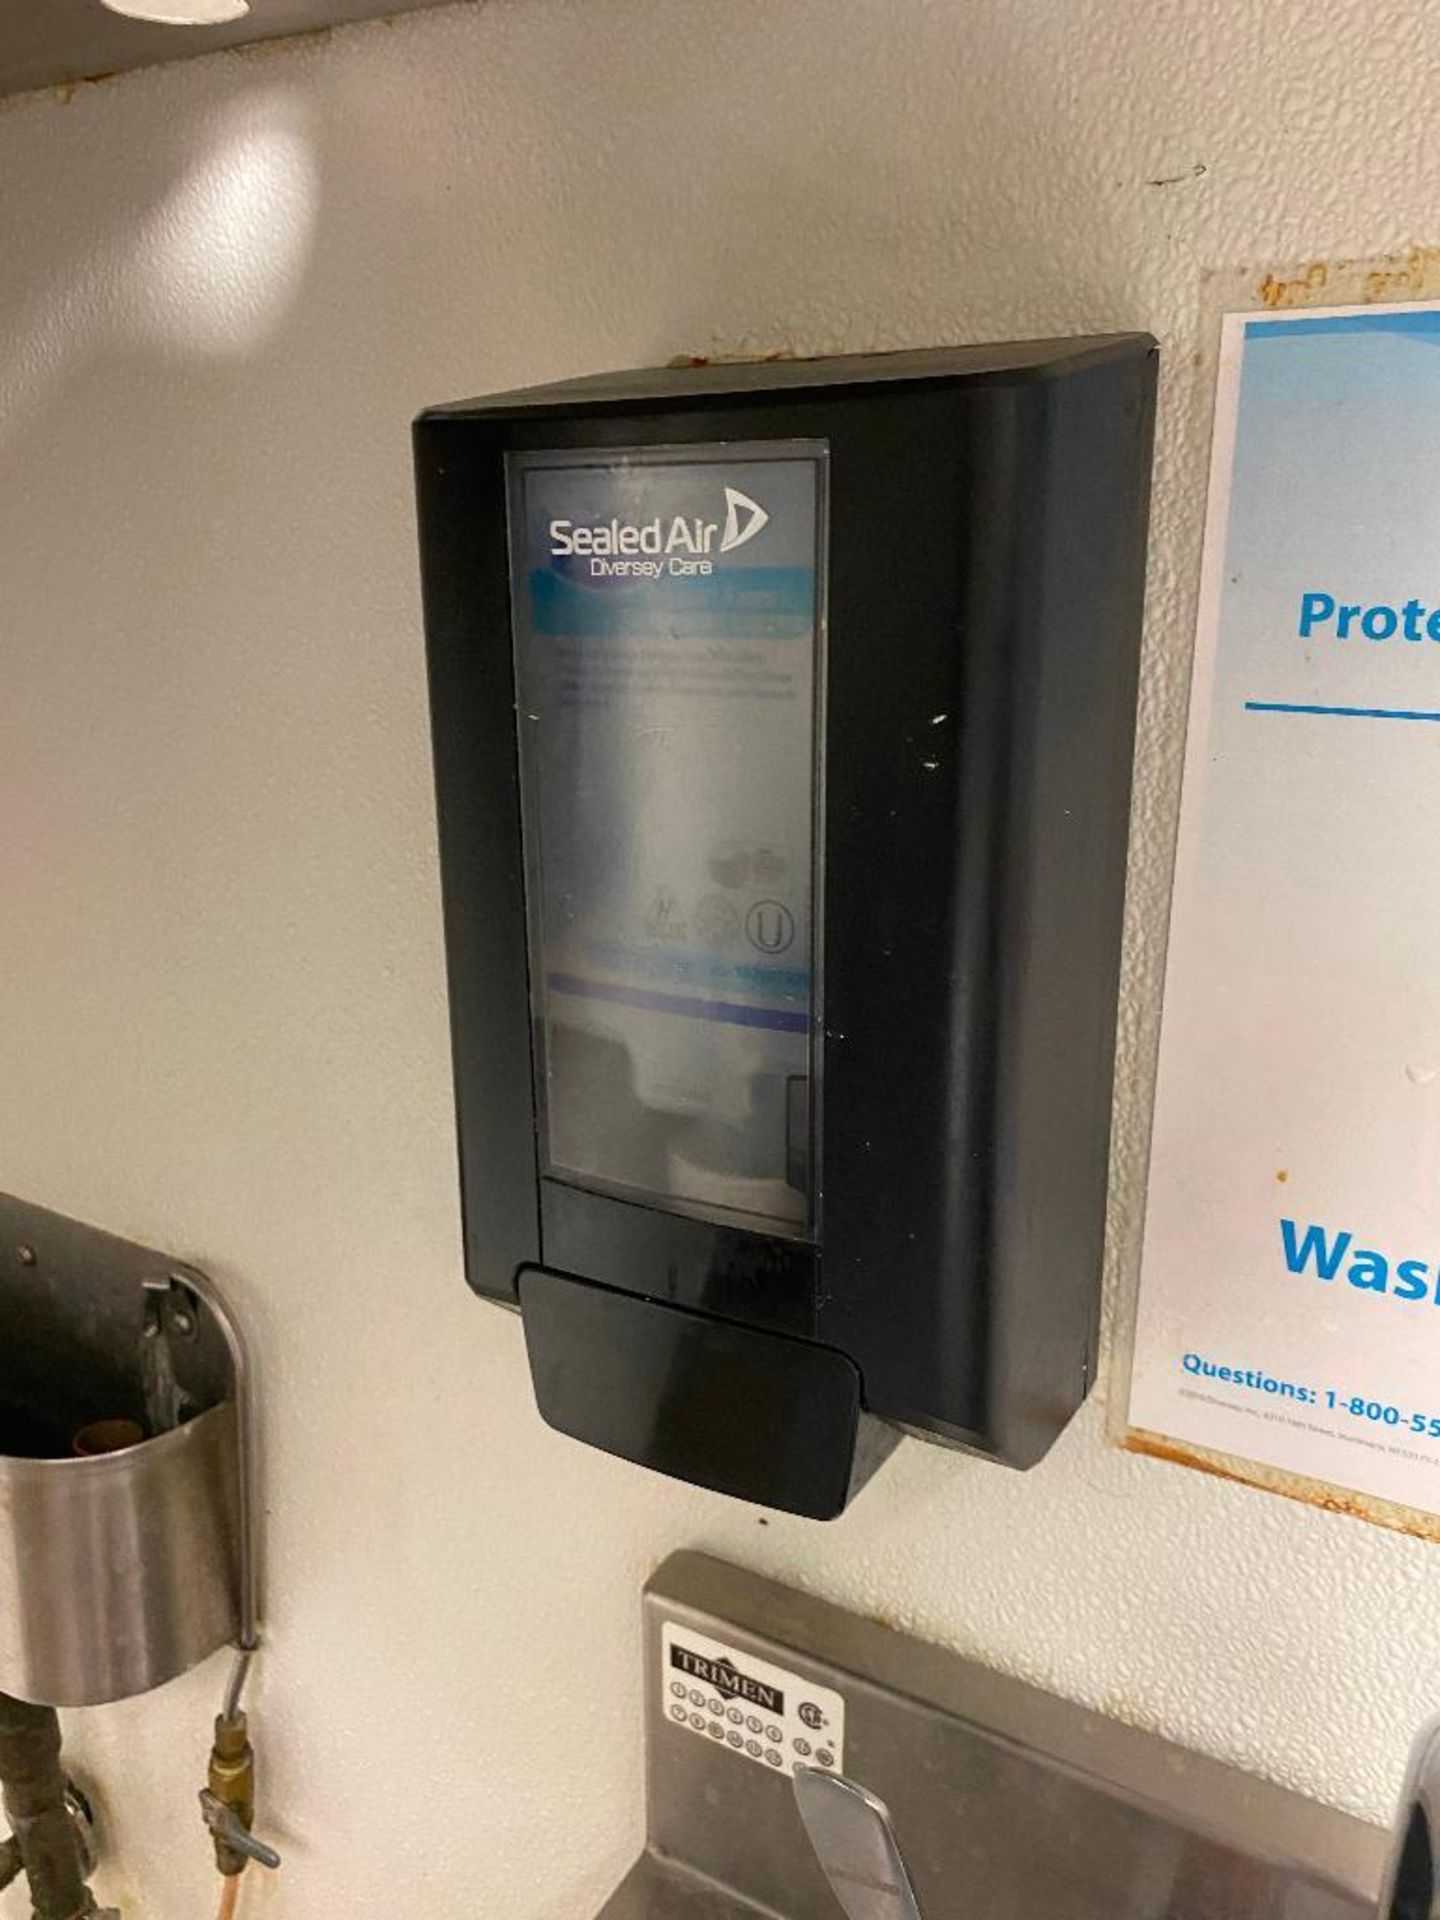 (3) CASCADES PRO PAPER TOWEL DISPENSERS - NOTE: REQUIRES REMOVAL FROM WALL, PLEASE INSPECT - Image 4 of 4